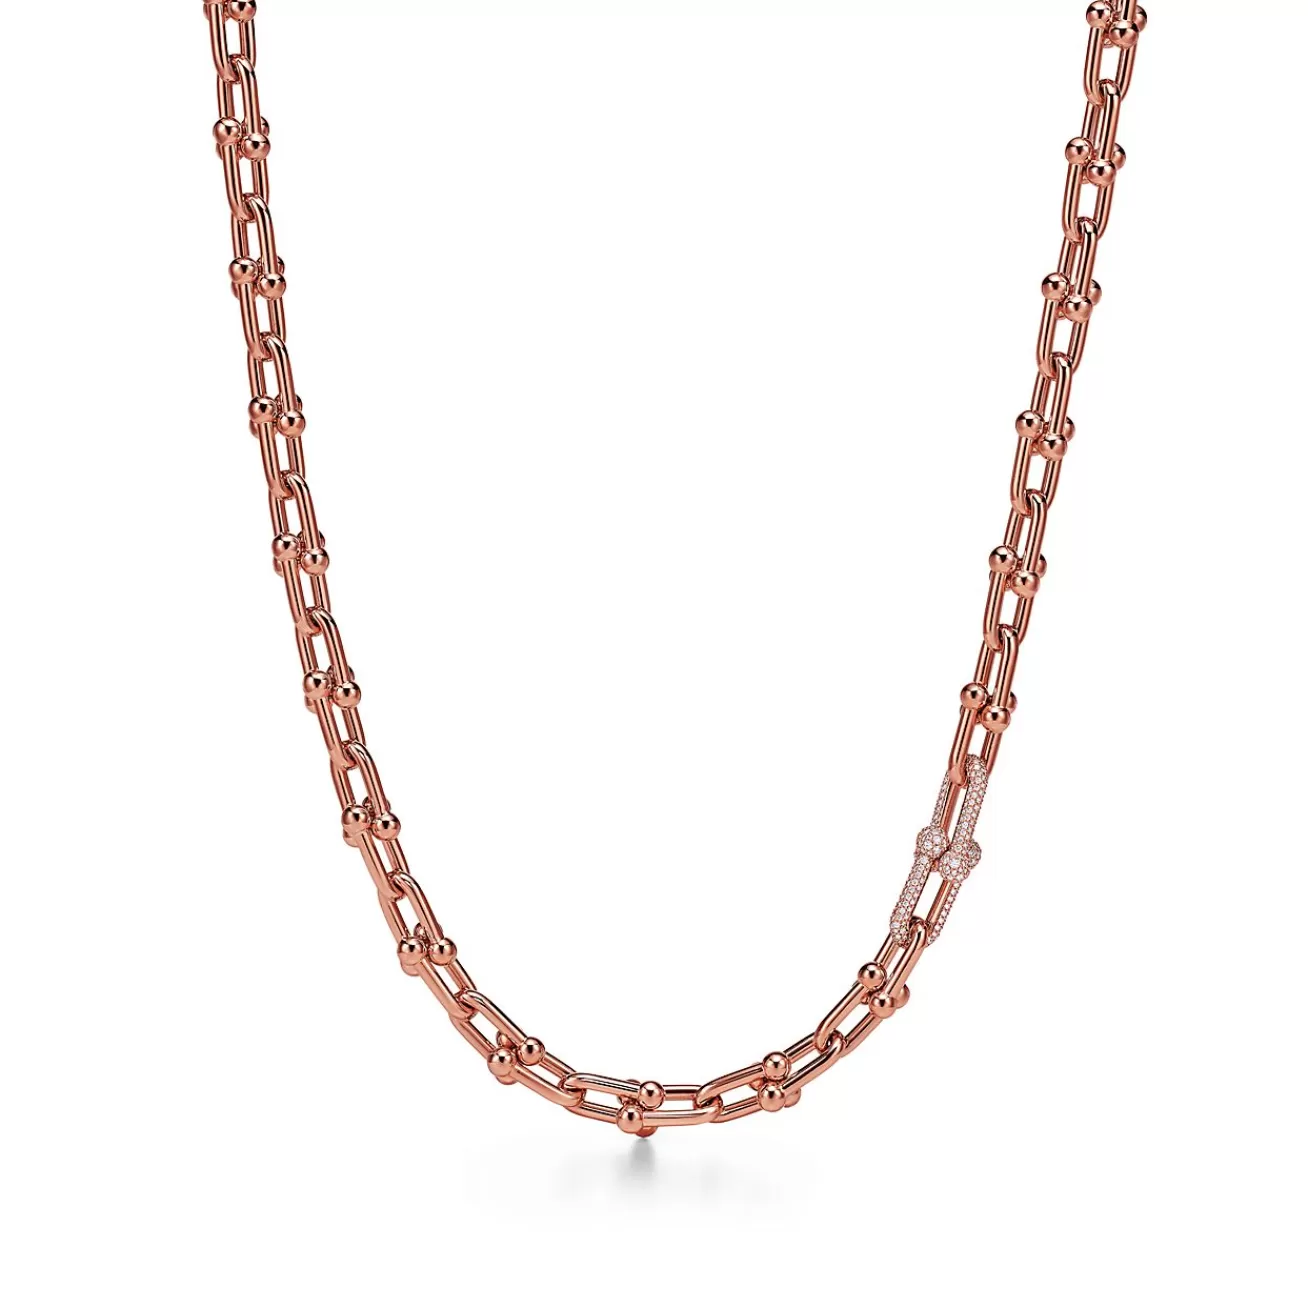 Tiffany & Co. Tiffany HardWear Medium Link Necklace in Rose Gold with Diamonds | ^ Necklaces & Pendants | New Jewelry